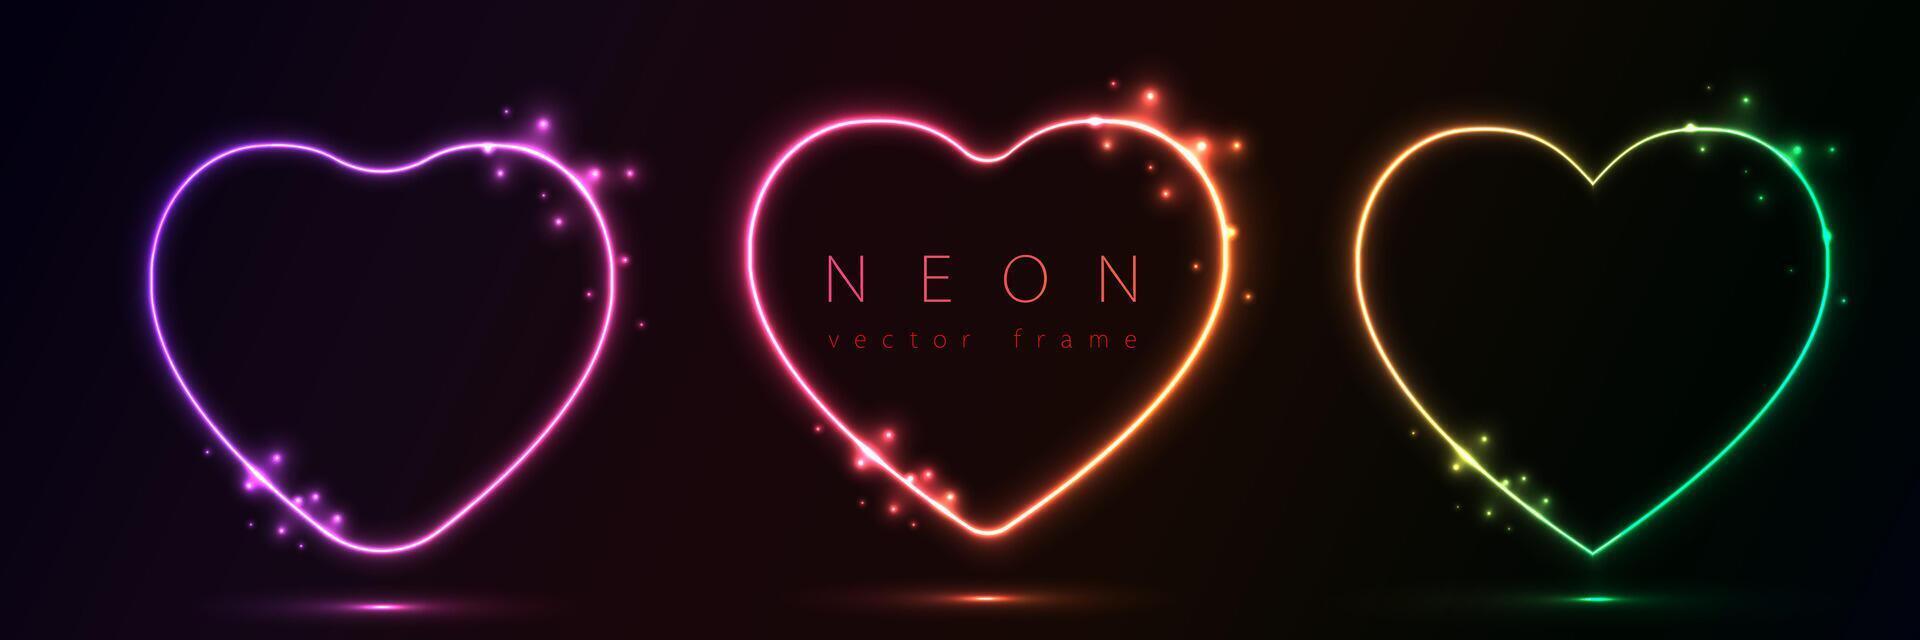 Set of glowing neon color heart shape with wavy dynamic lines on black background technology concept. Love light frame border for badges, price tag, label cards, logo design, valentines day. vector